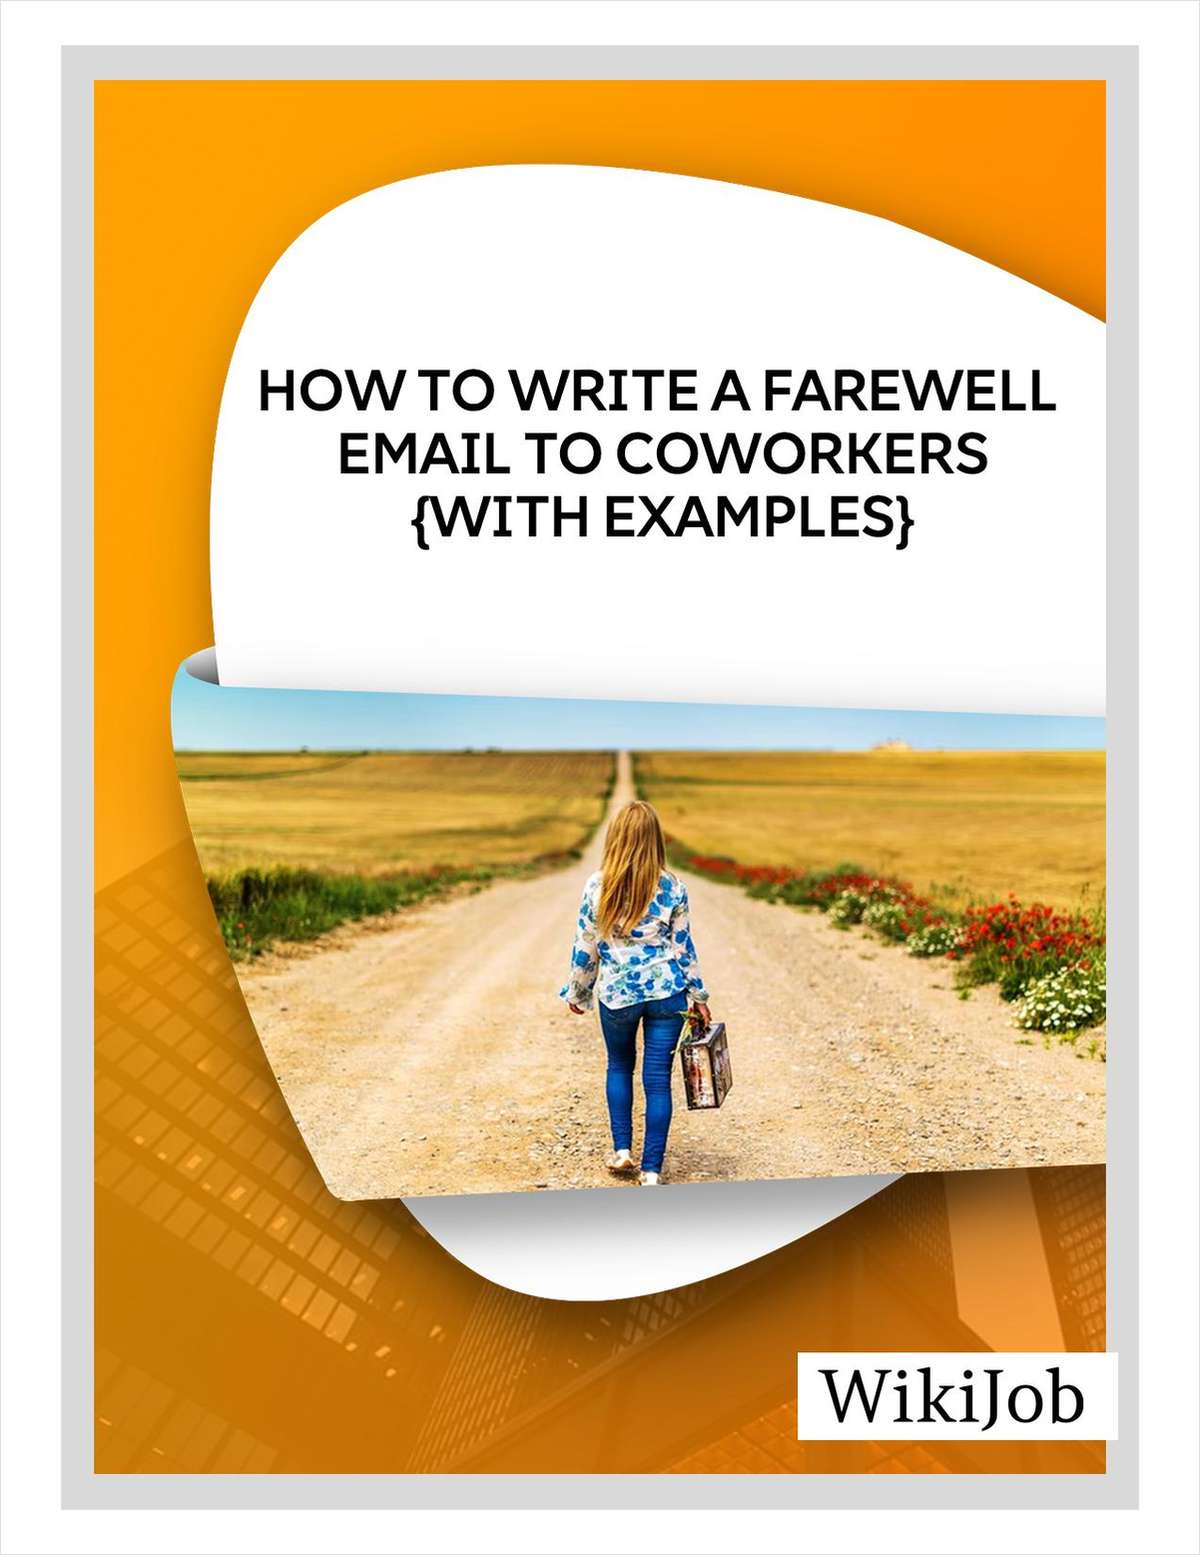 How to Write a Farewell Email to Coworkers